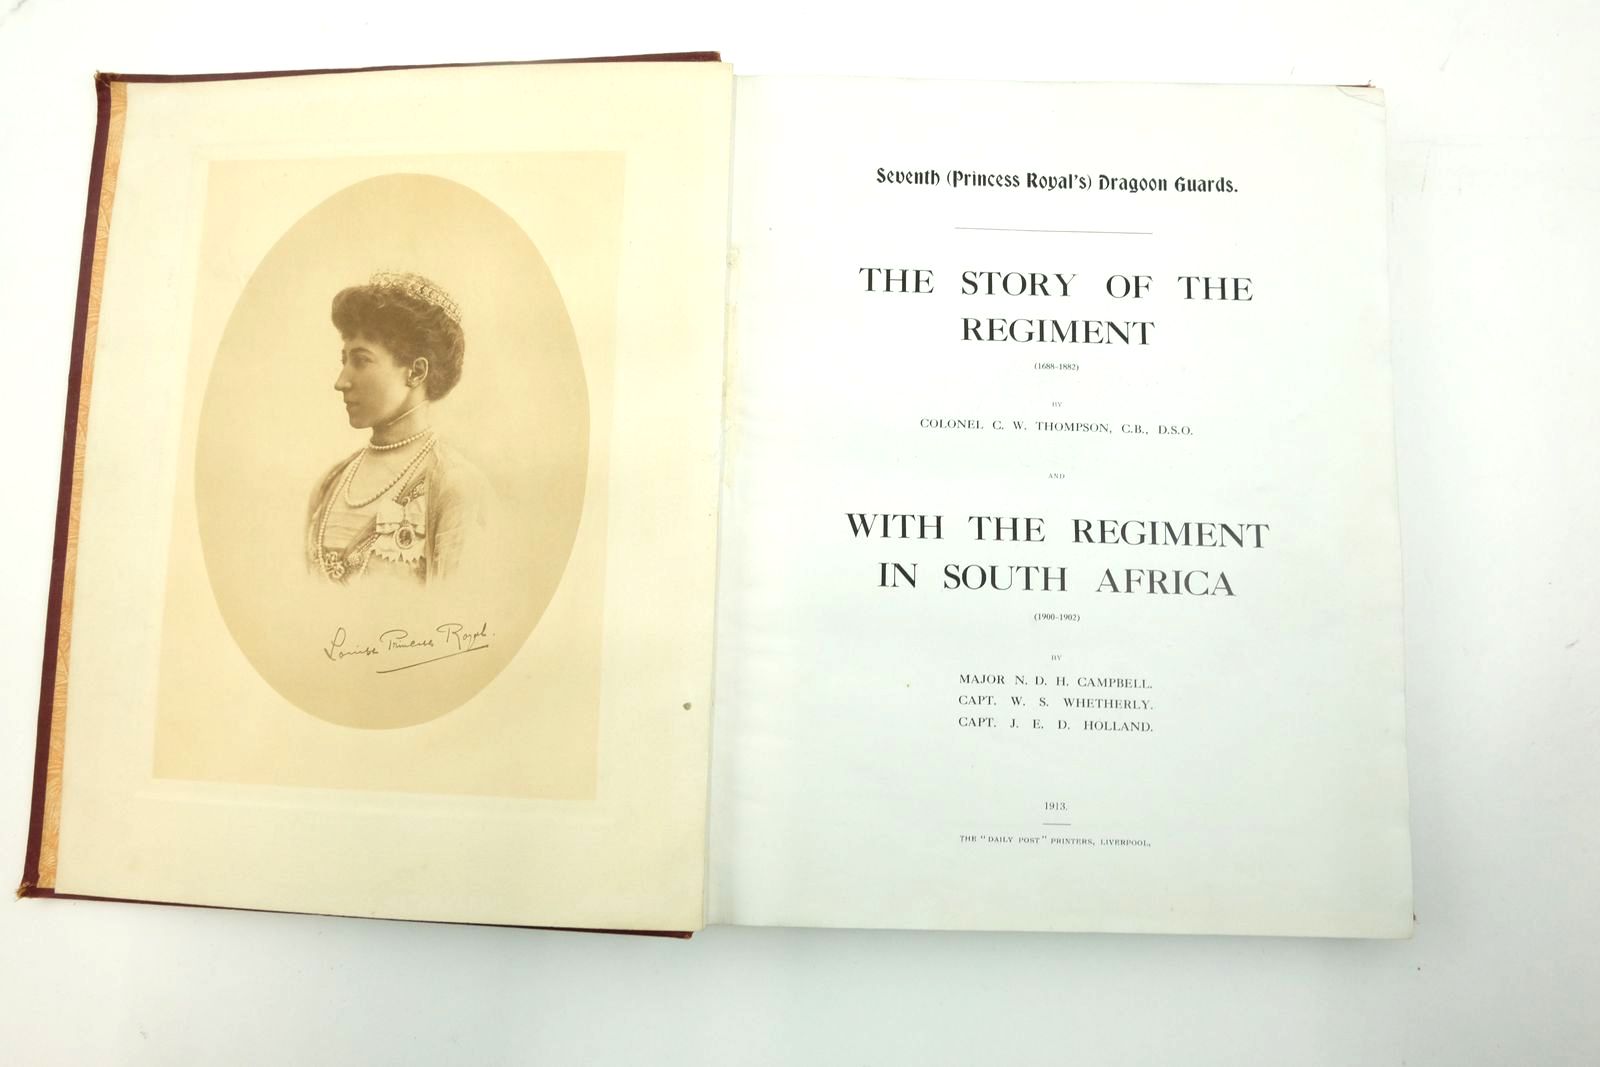 Photo of SEVENTH (PRINCESS ROYAL'S) DRAGOON GUARDS: THE STORY OF THE REGIMENT (1688-1882) AND WITH THE REGIMENT IN SOUTH AFRICA (1900-1902) written by Thompson, C.W.
Campbell, N.D.H.
Whetherly, W.S.
Holland, J.E.D. (STOCK CODE: 2137722)  for sale by Stella & Rose's Books